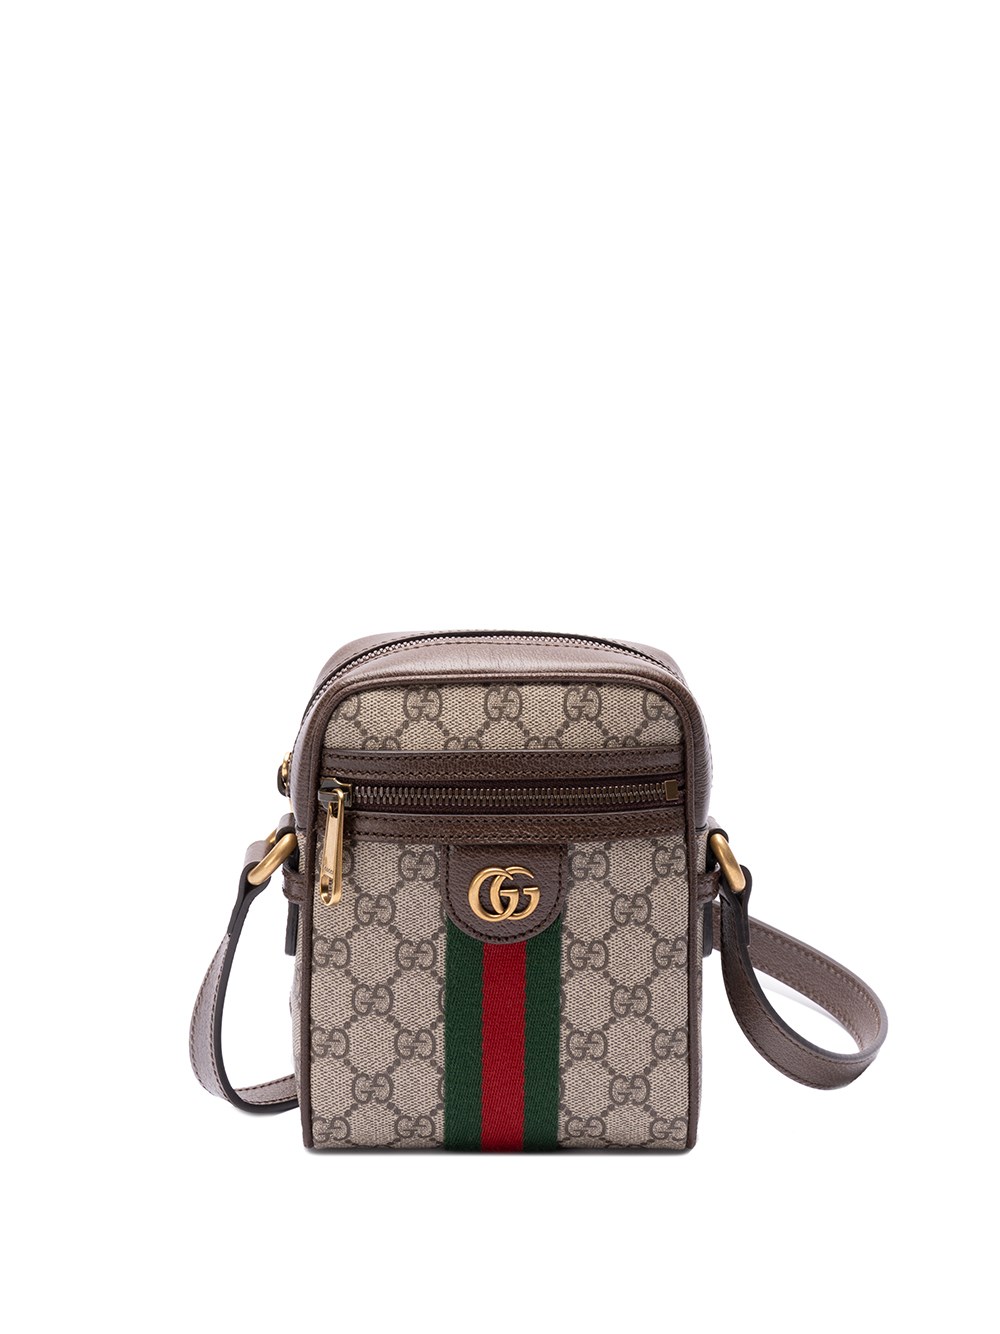 Gucci `ophidia Gg` Shoulder Bag In Brown